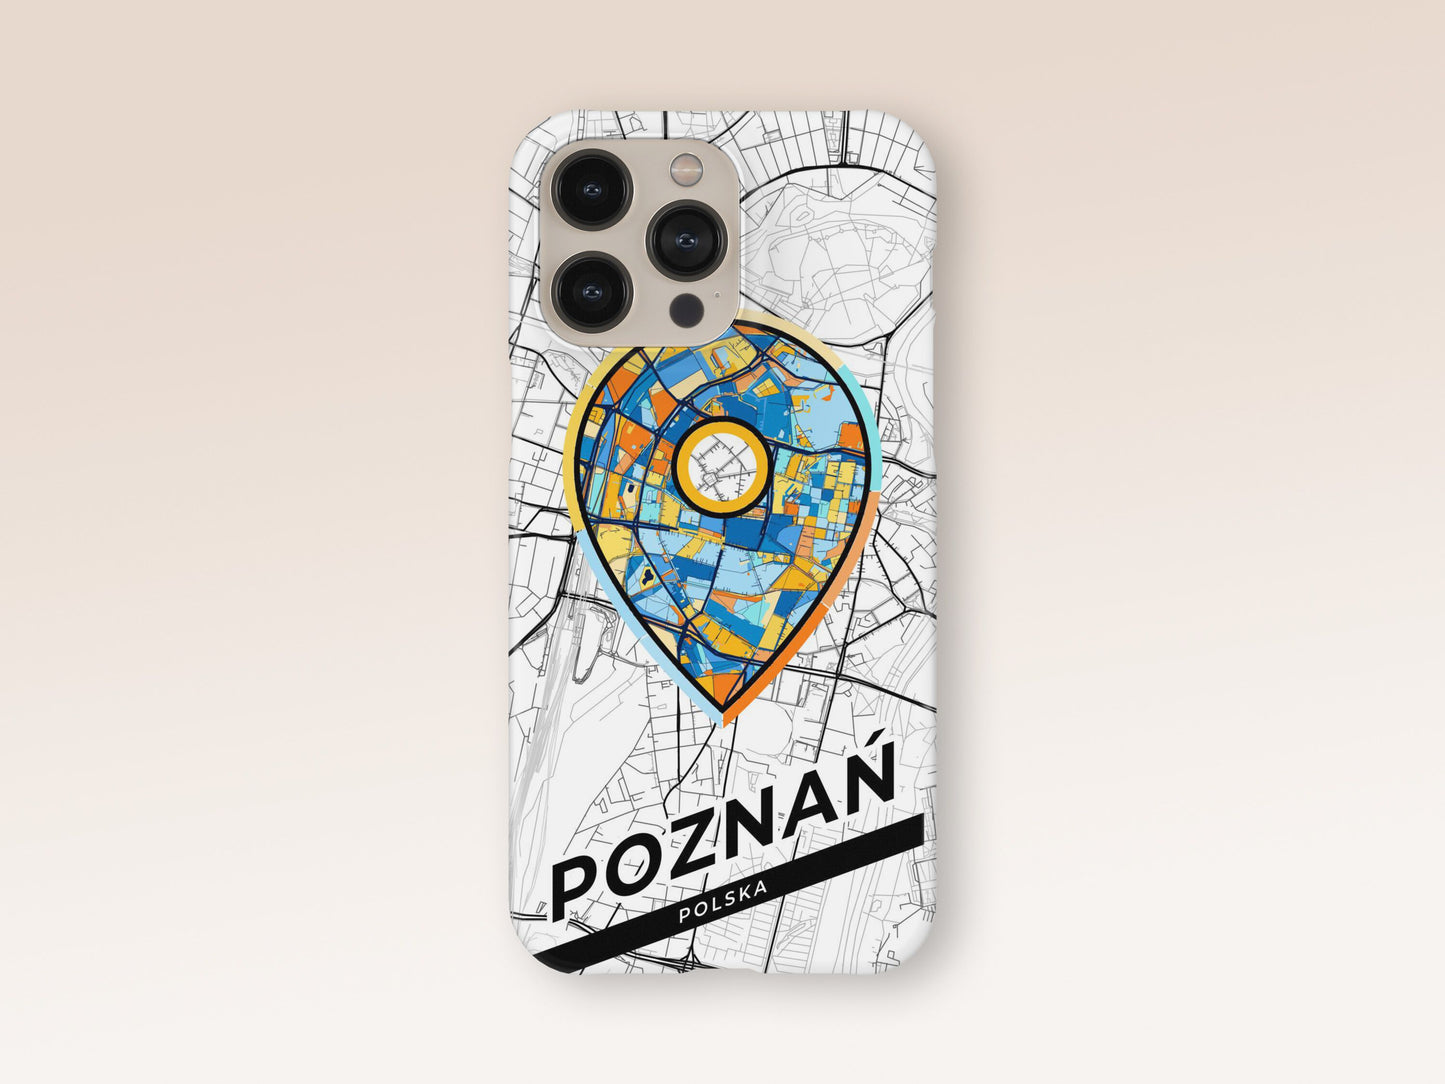 Poznań Poland slim phone case with colorful icon. Birthday, wedding or housewarming gift. Couple match cases. 1